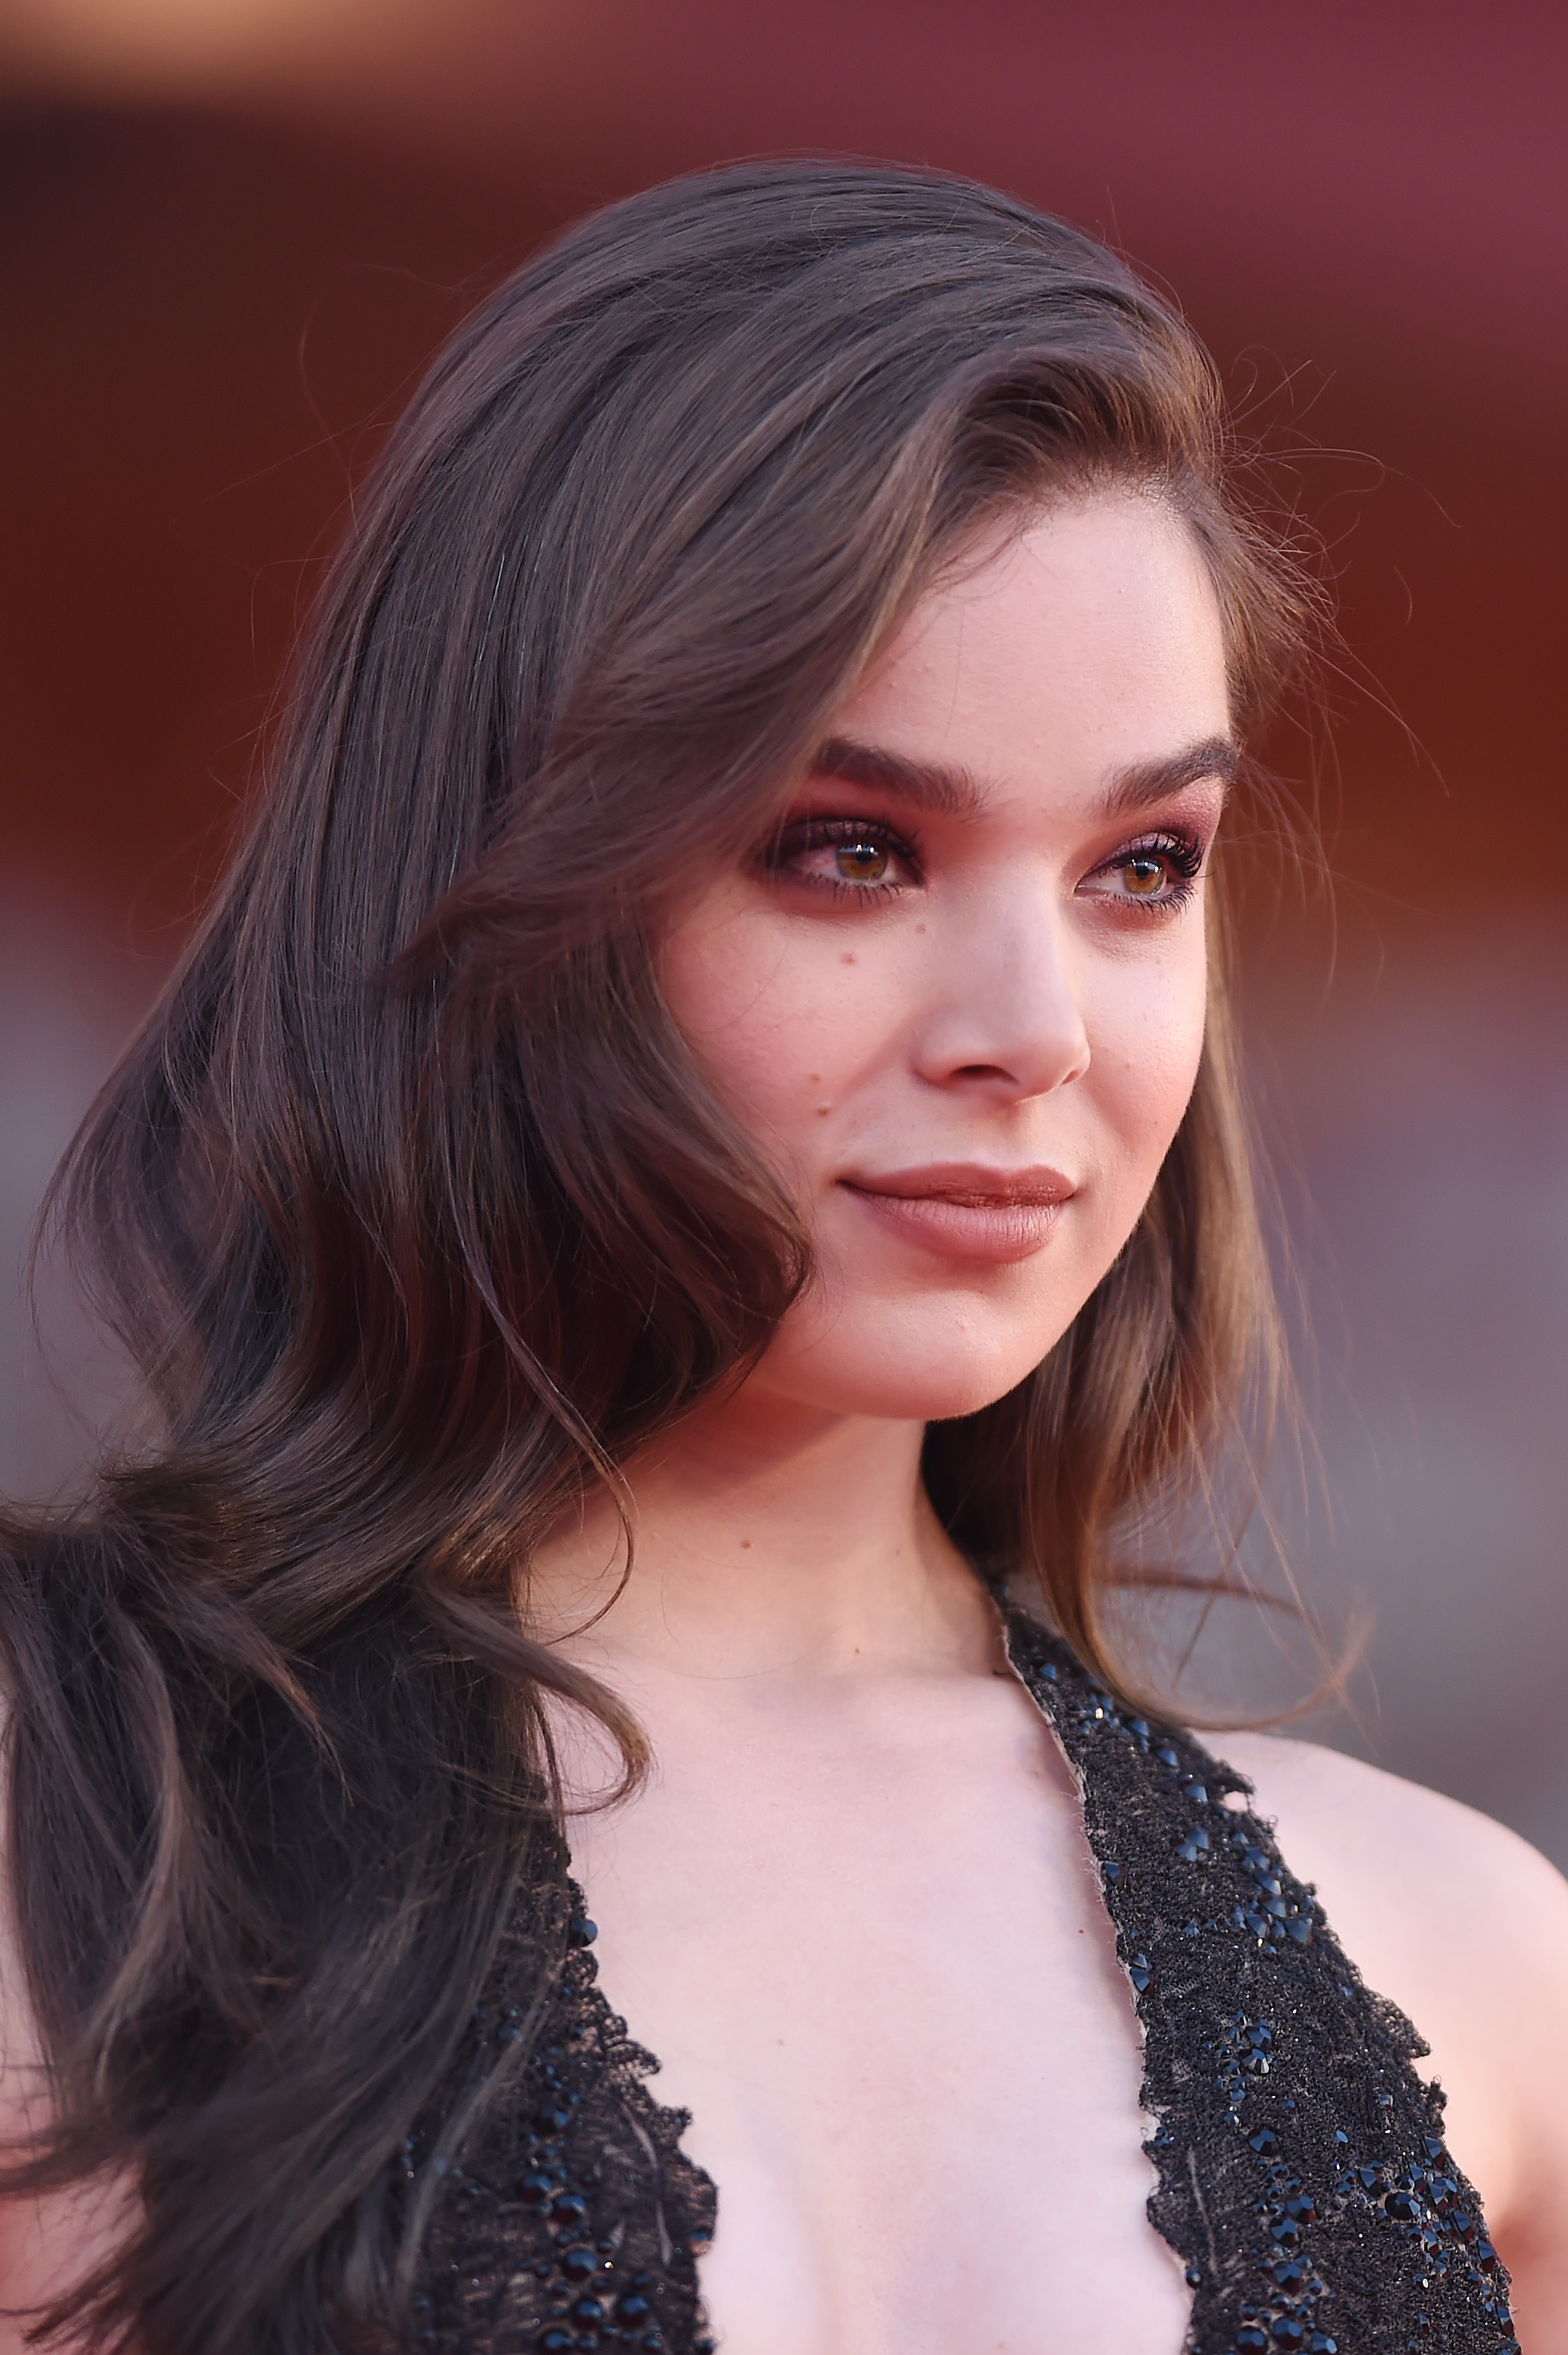 Hailee Steinfeld Movies and TV Shows on Netflix